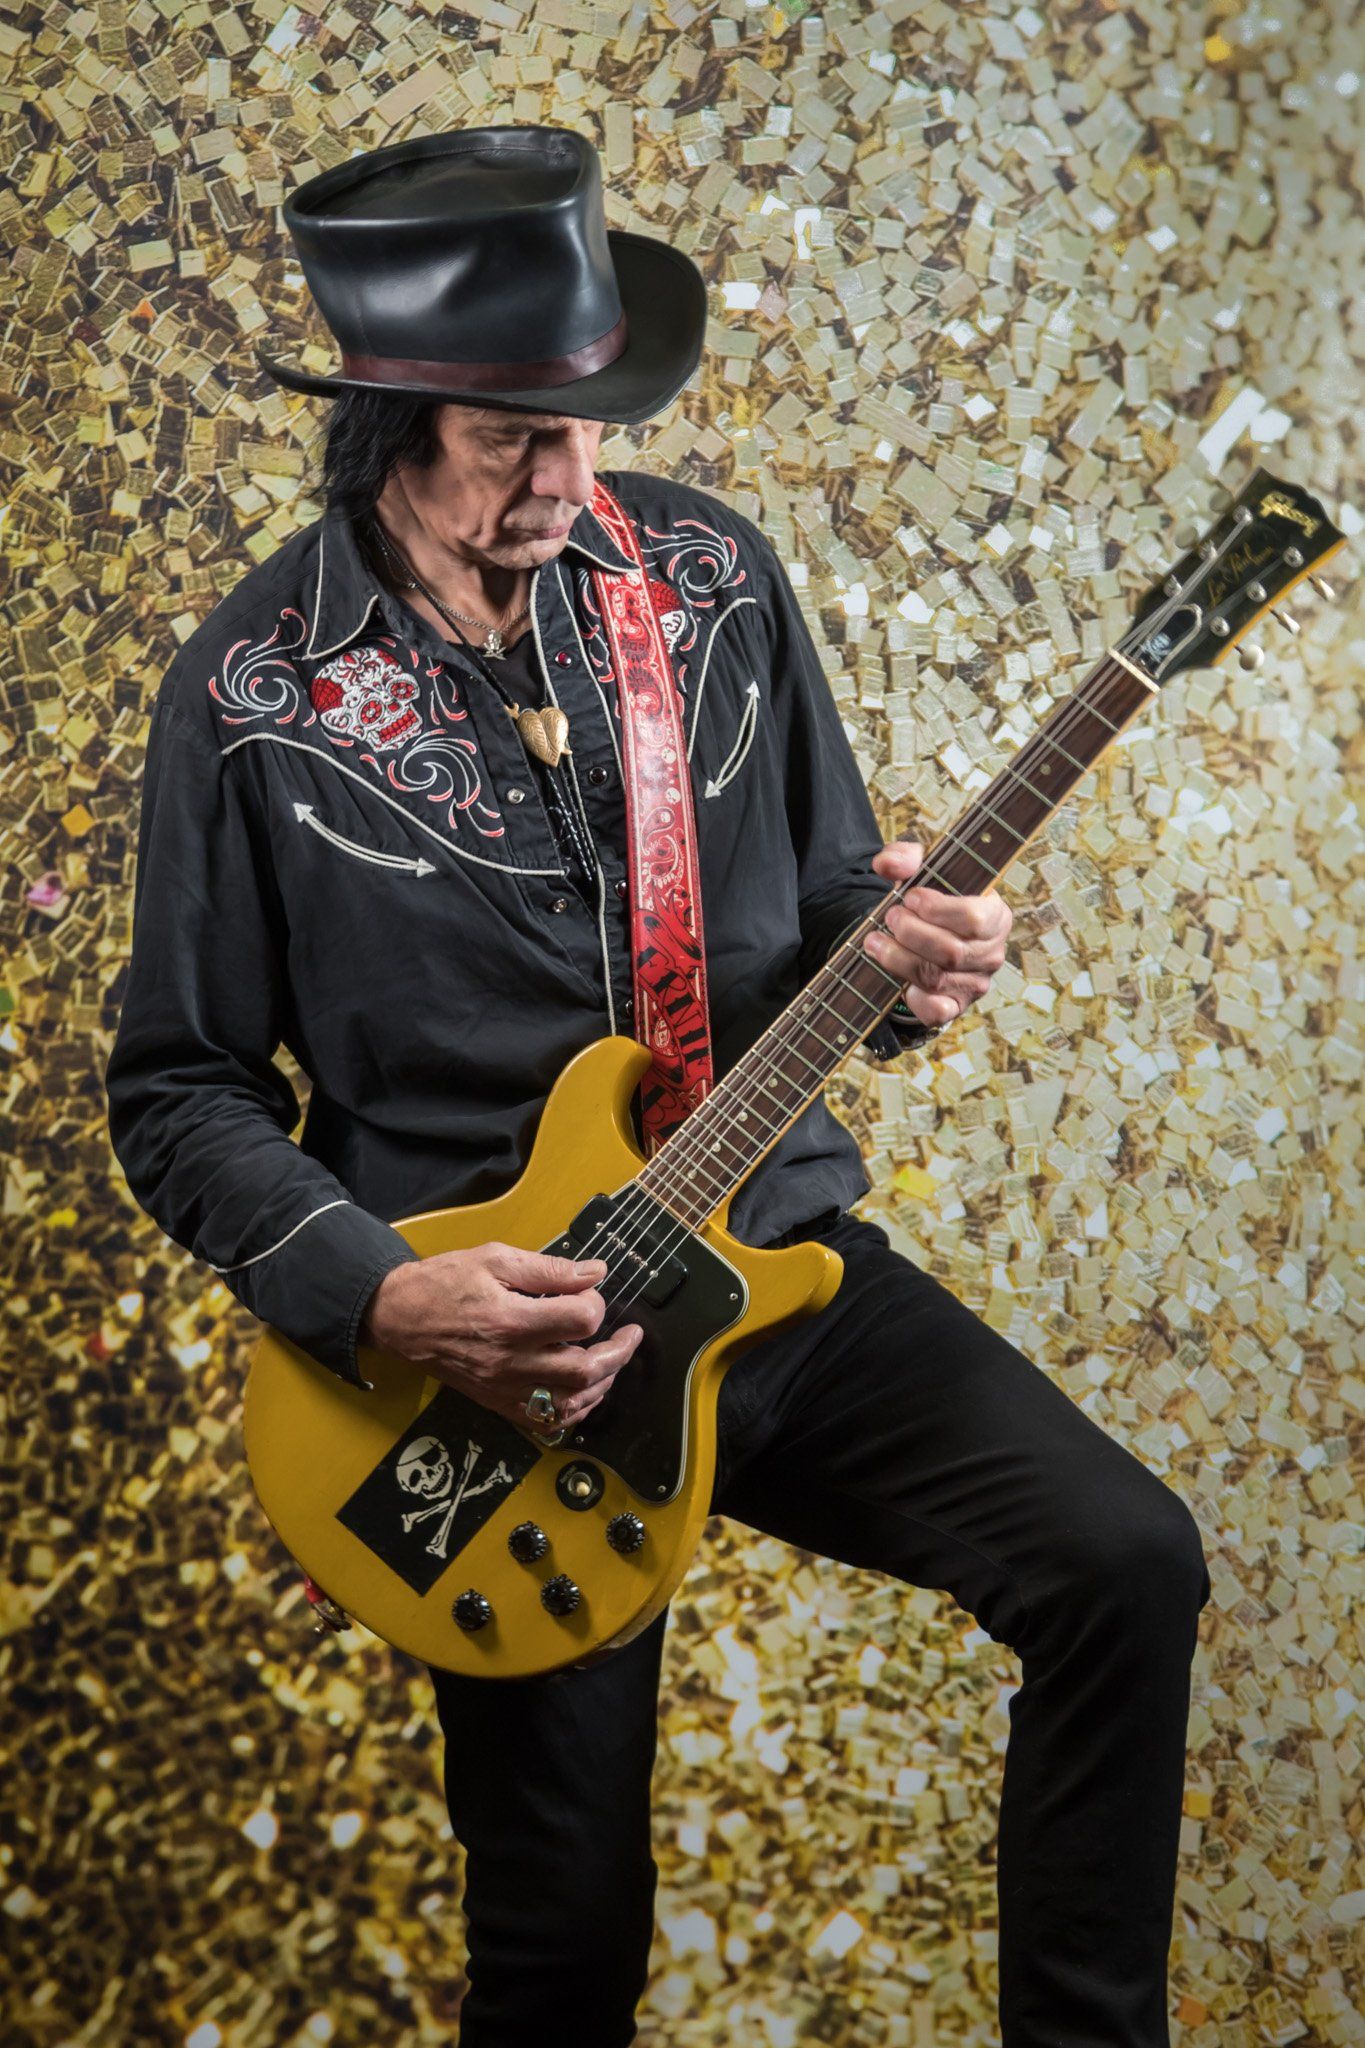 A portrait of a rock guitarist in a black leather top hat playing his guitar against a glittery background